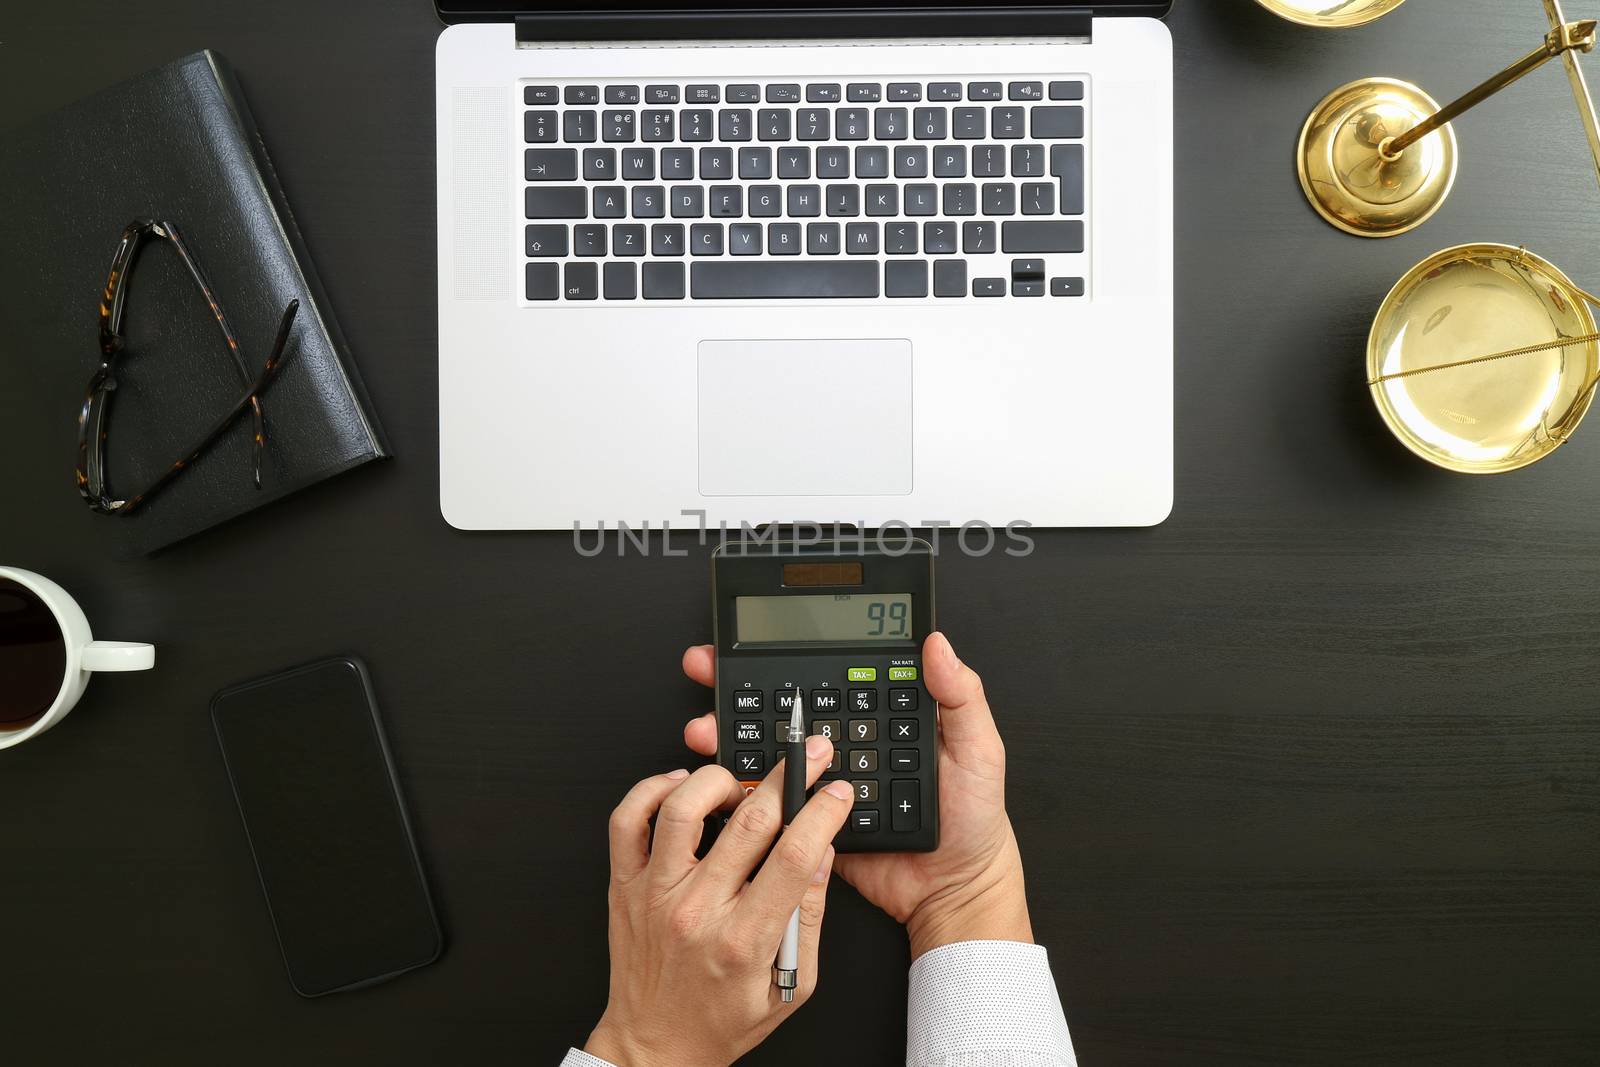 justice and law concept.businessman or lawyer or accountant working on accounts using a calculator and laptop computer and documents in modern office